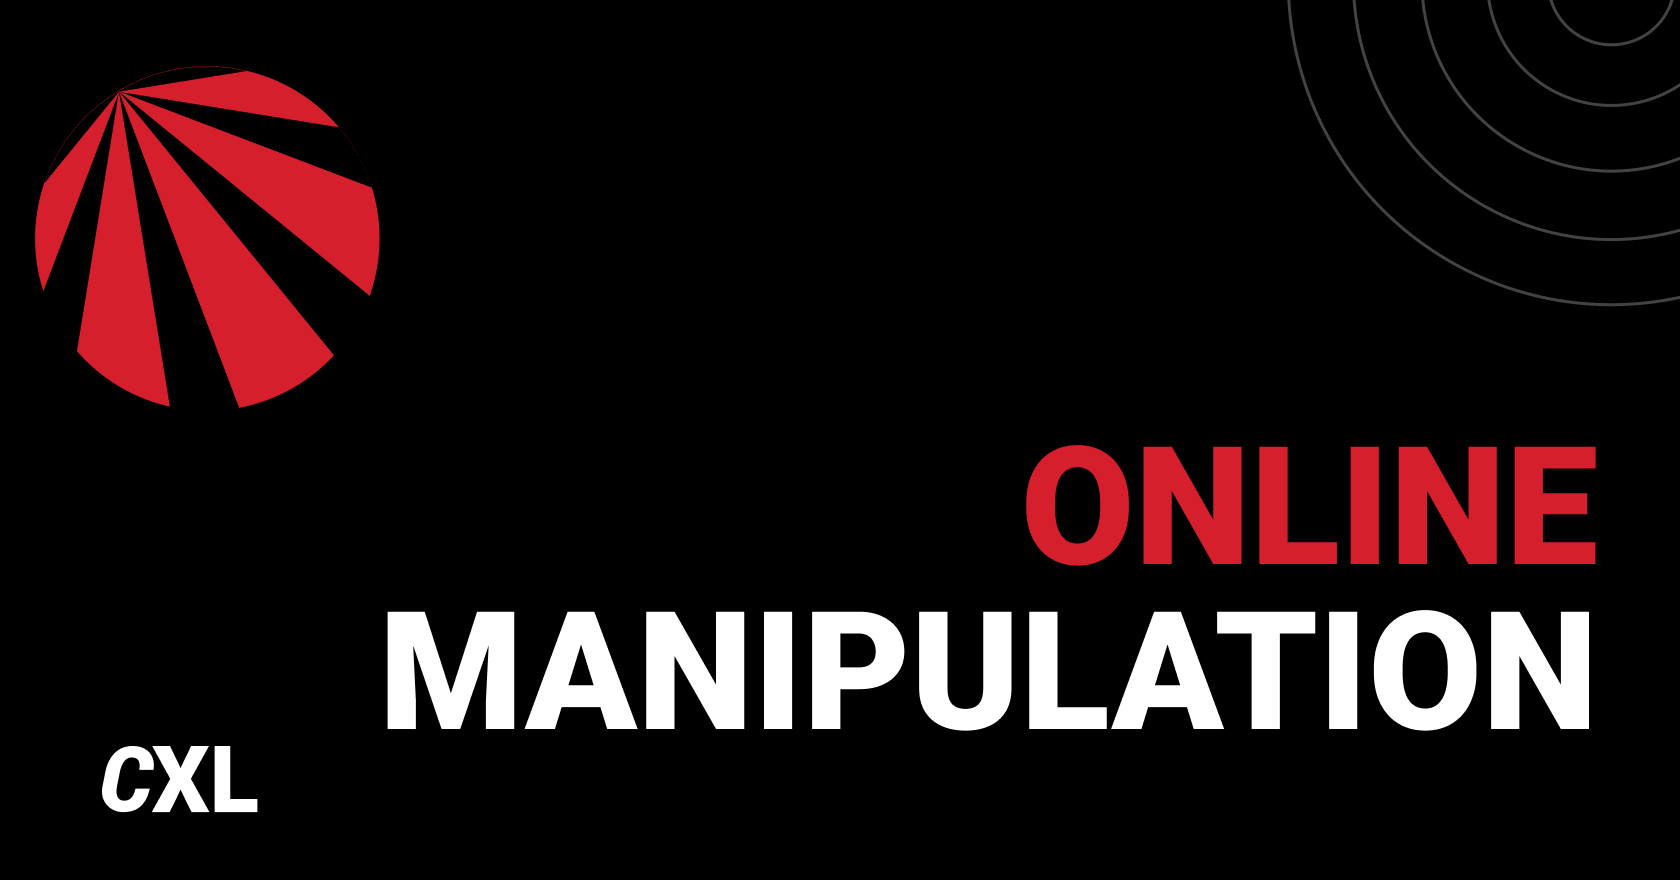 Online Manipulation: All The Ways You're Currently Being Deceived